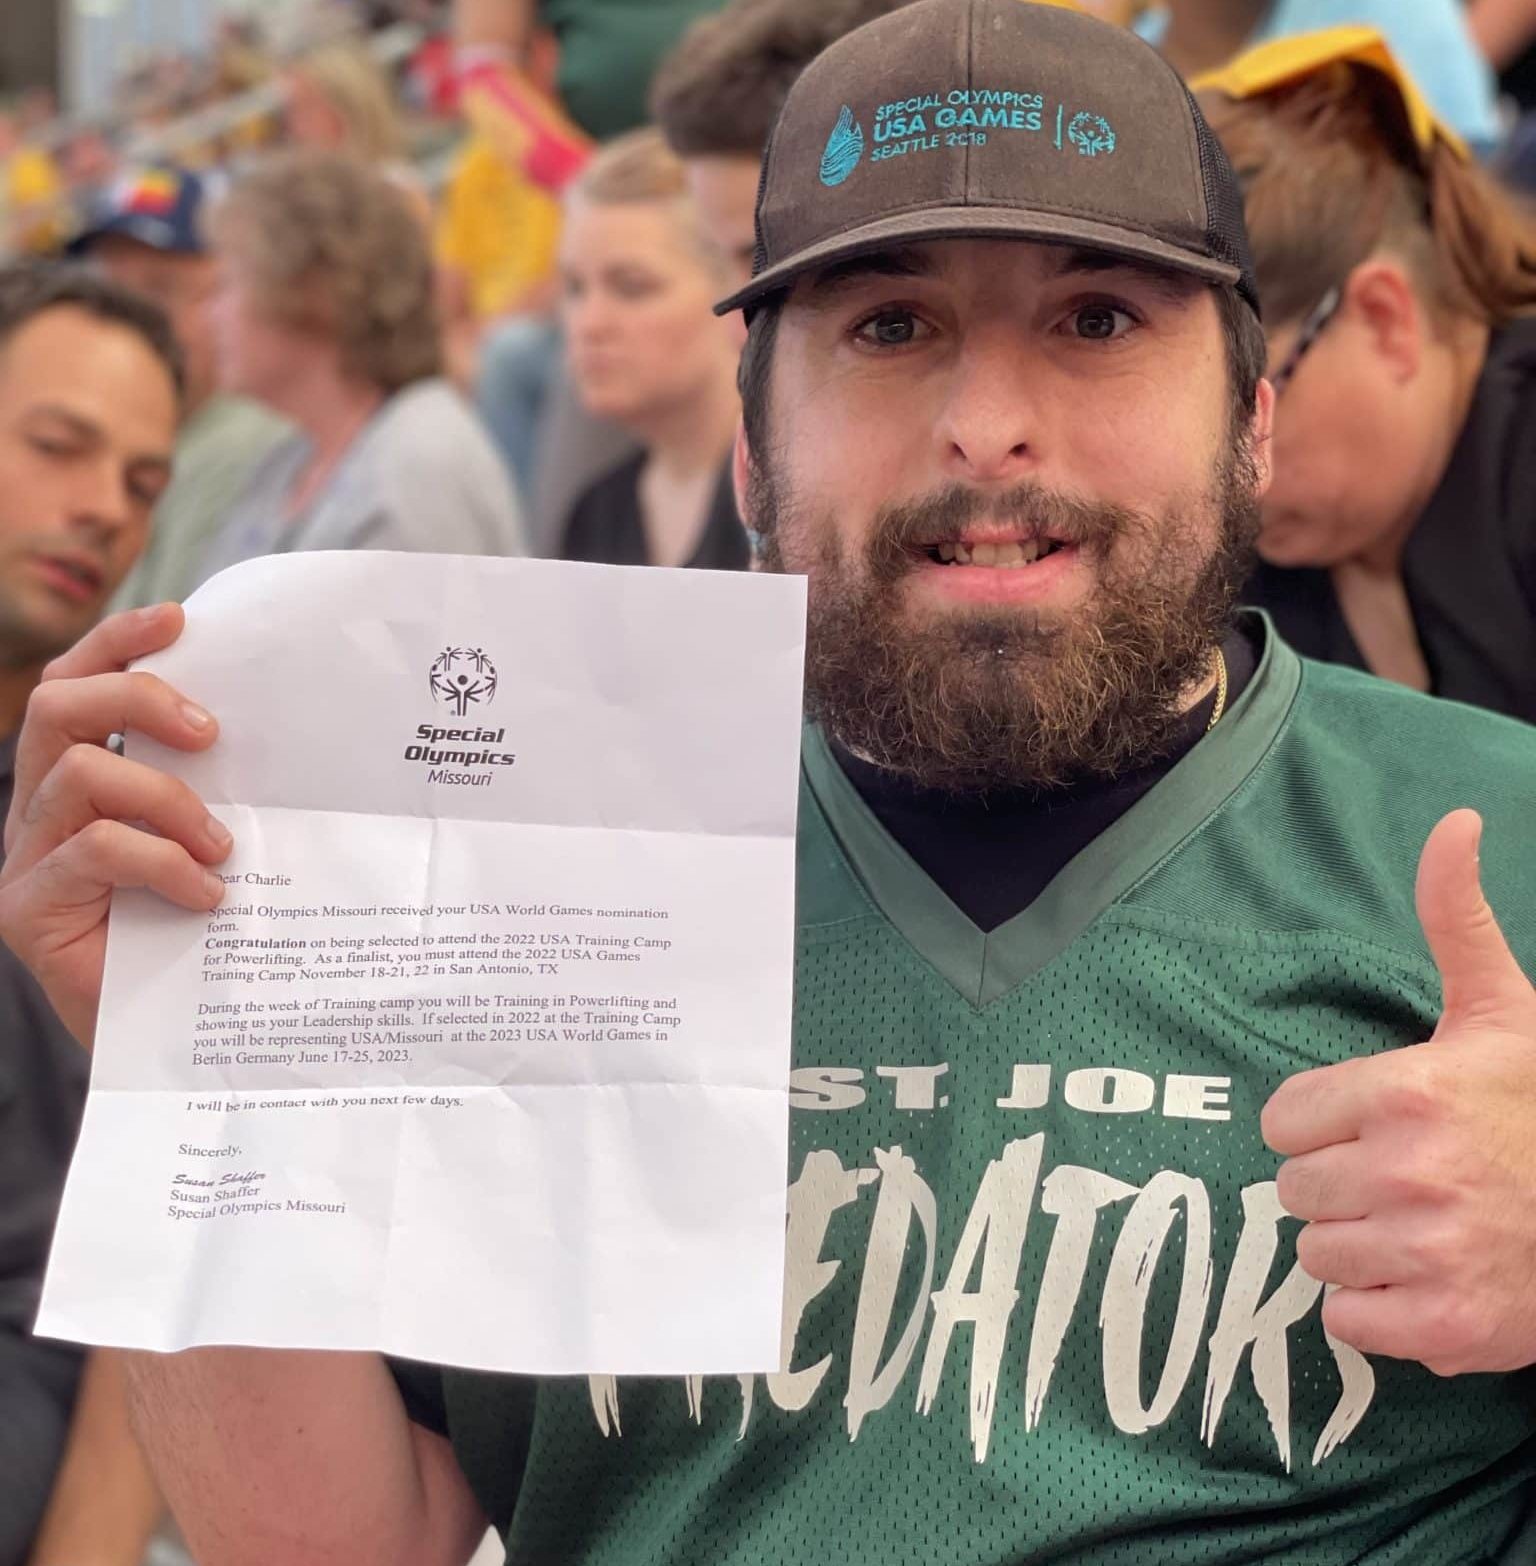 Charlie Phillips shows off his letter announcing his nomination to the 2023 Special Olympics World Games at Spratt Stadium in St. Joseph, Mo. on Thursday, Sept. 1, 2022